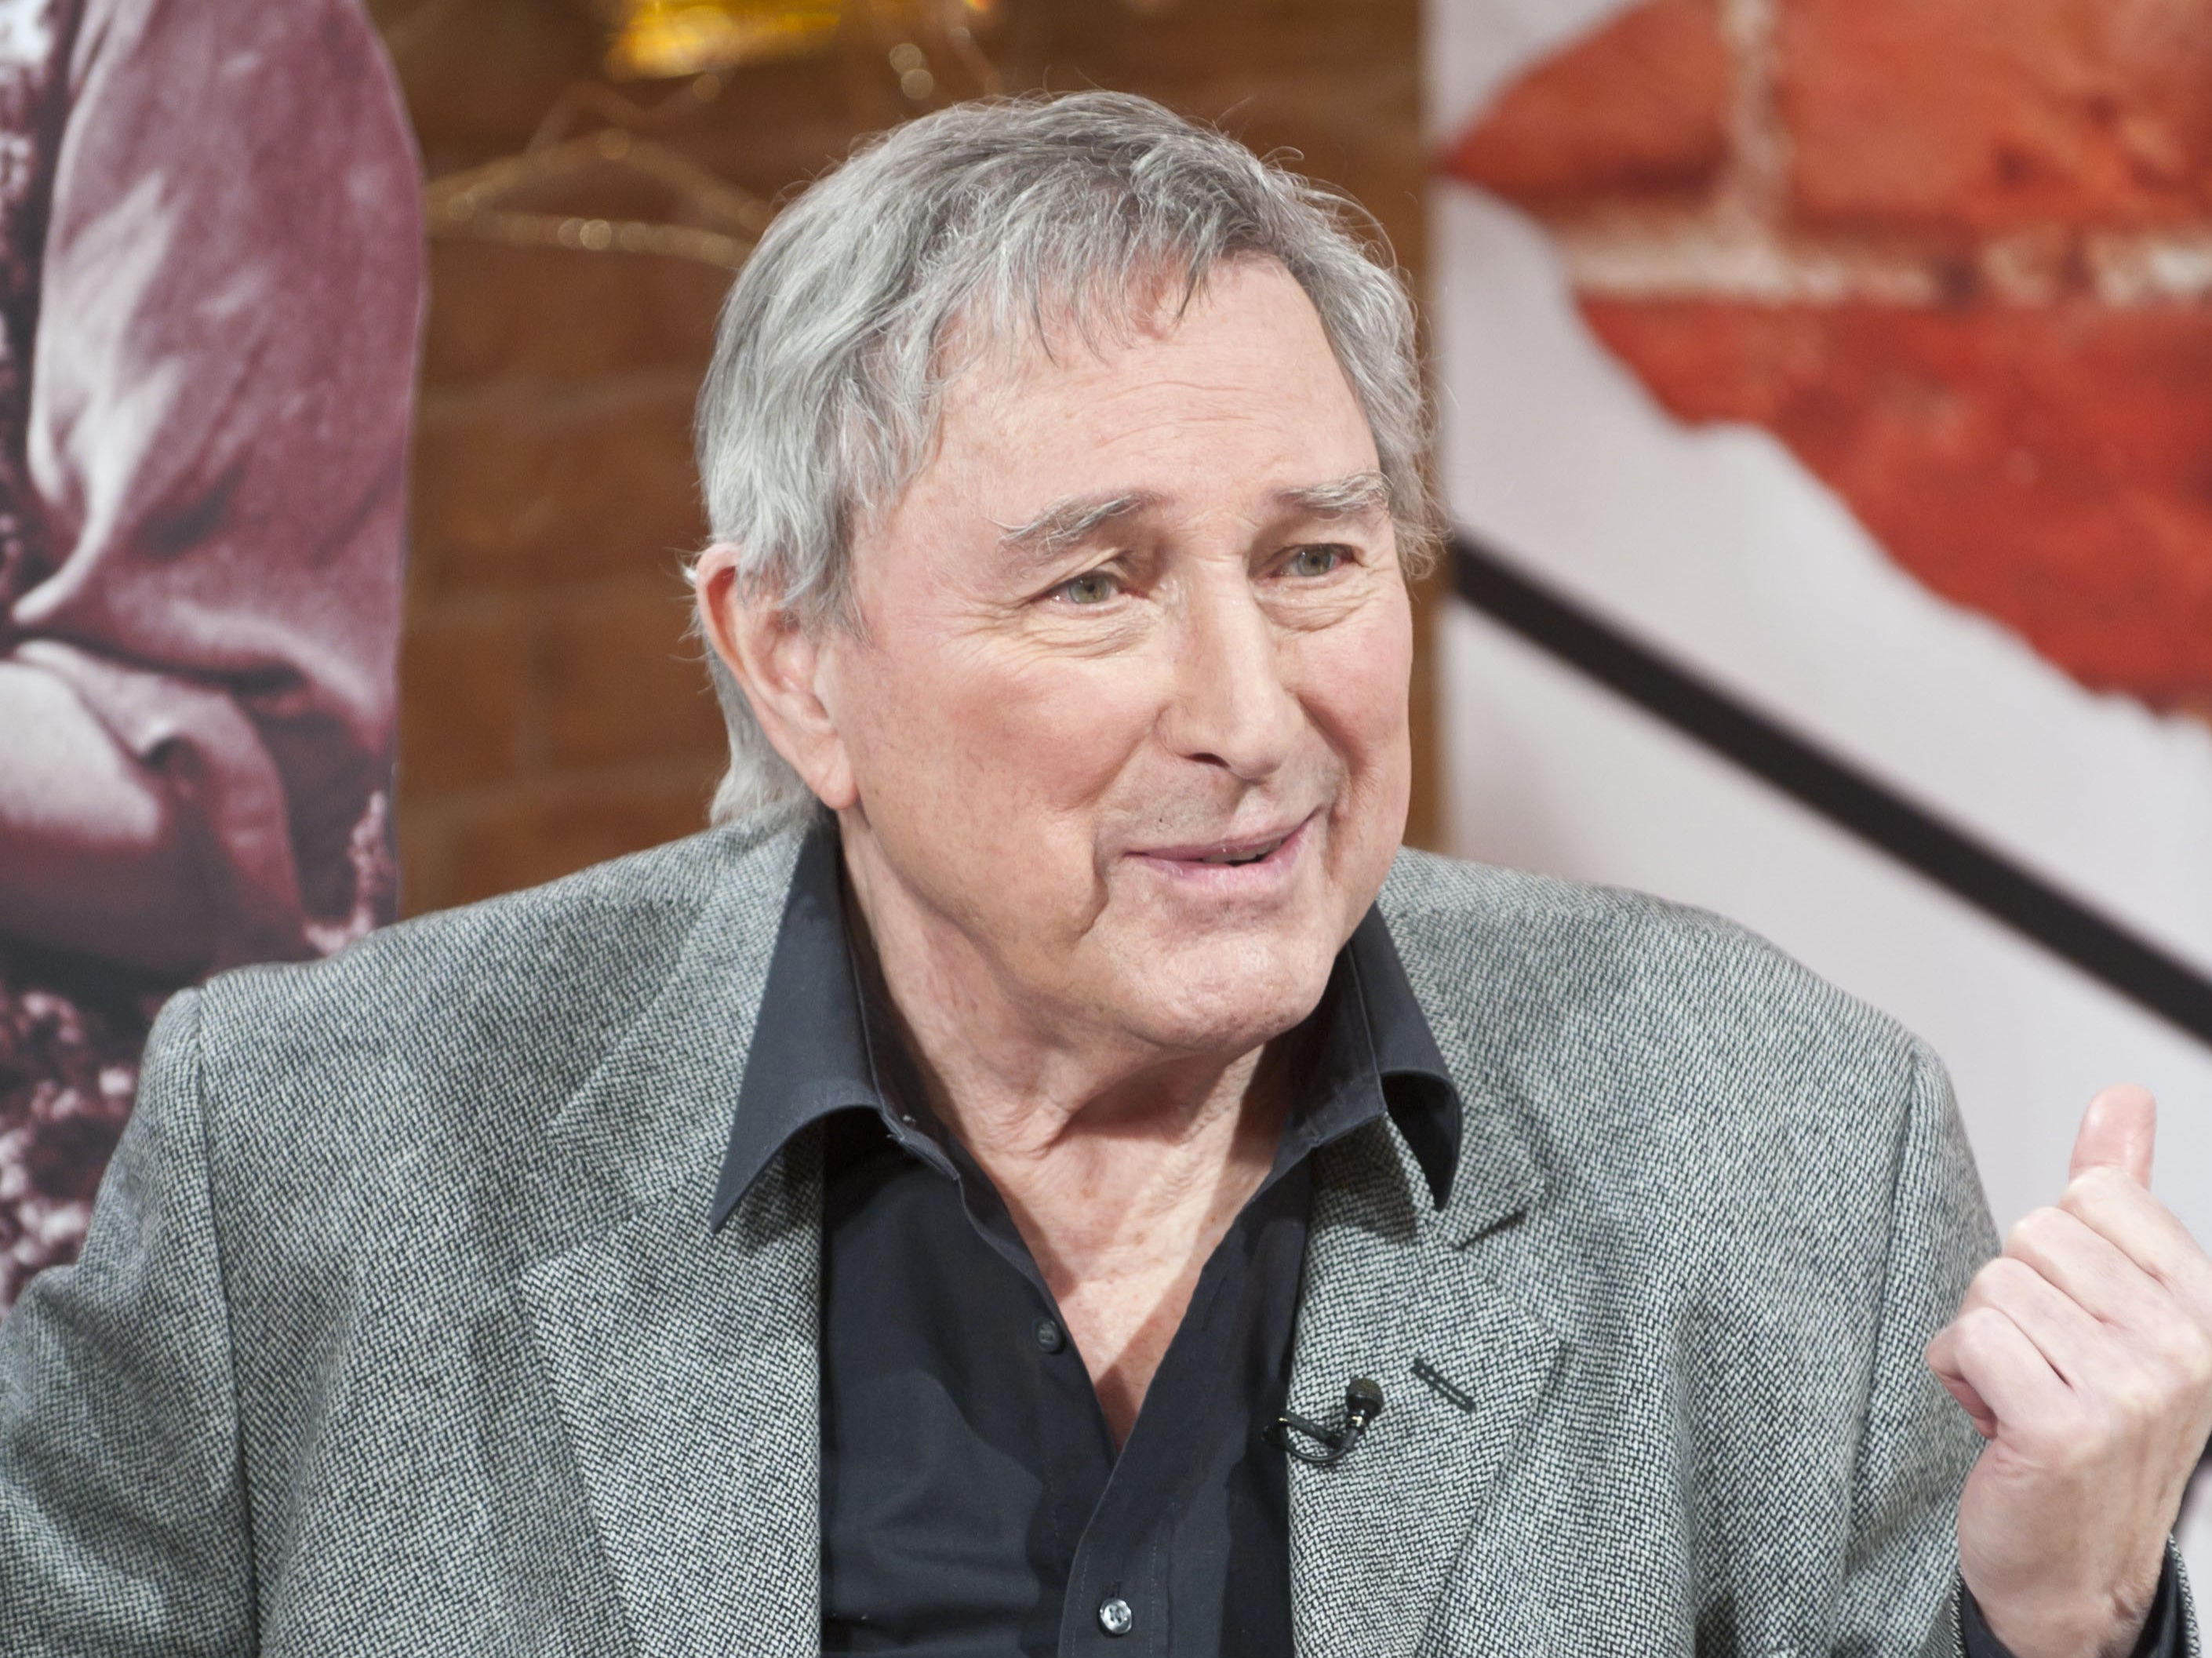 Mark Eden played one of Coronation Street’s best-known villains in the 1980s